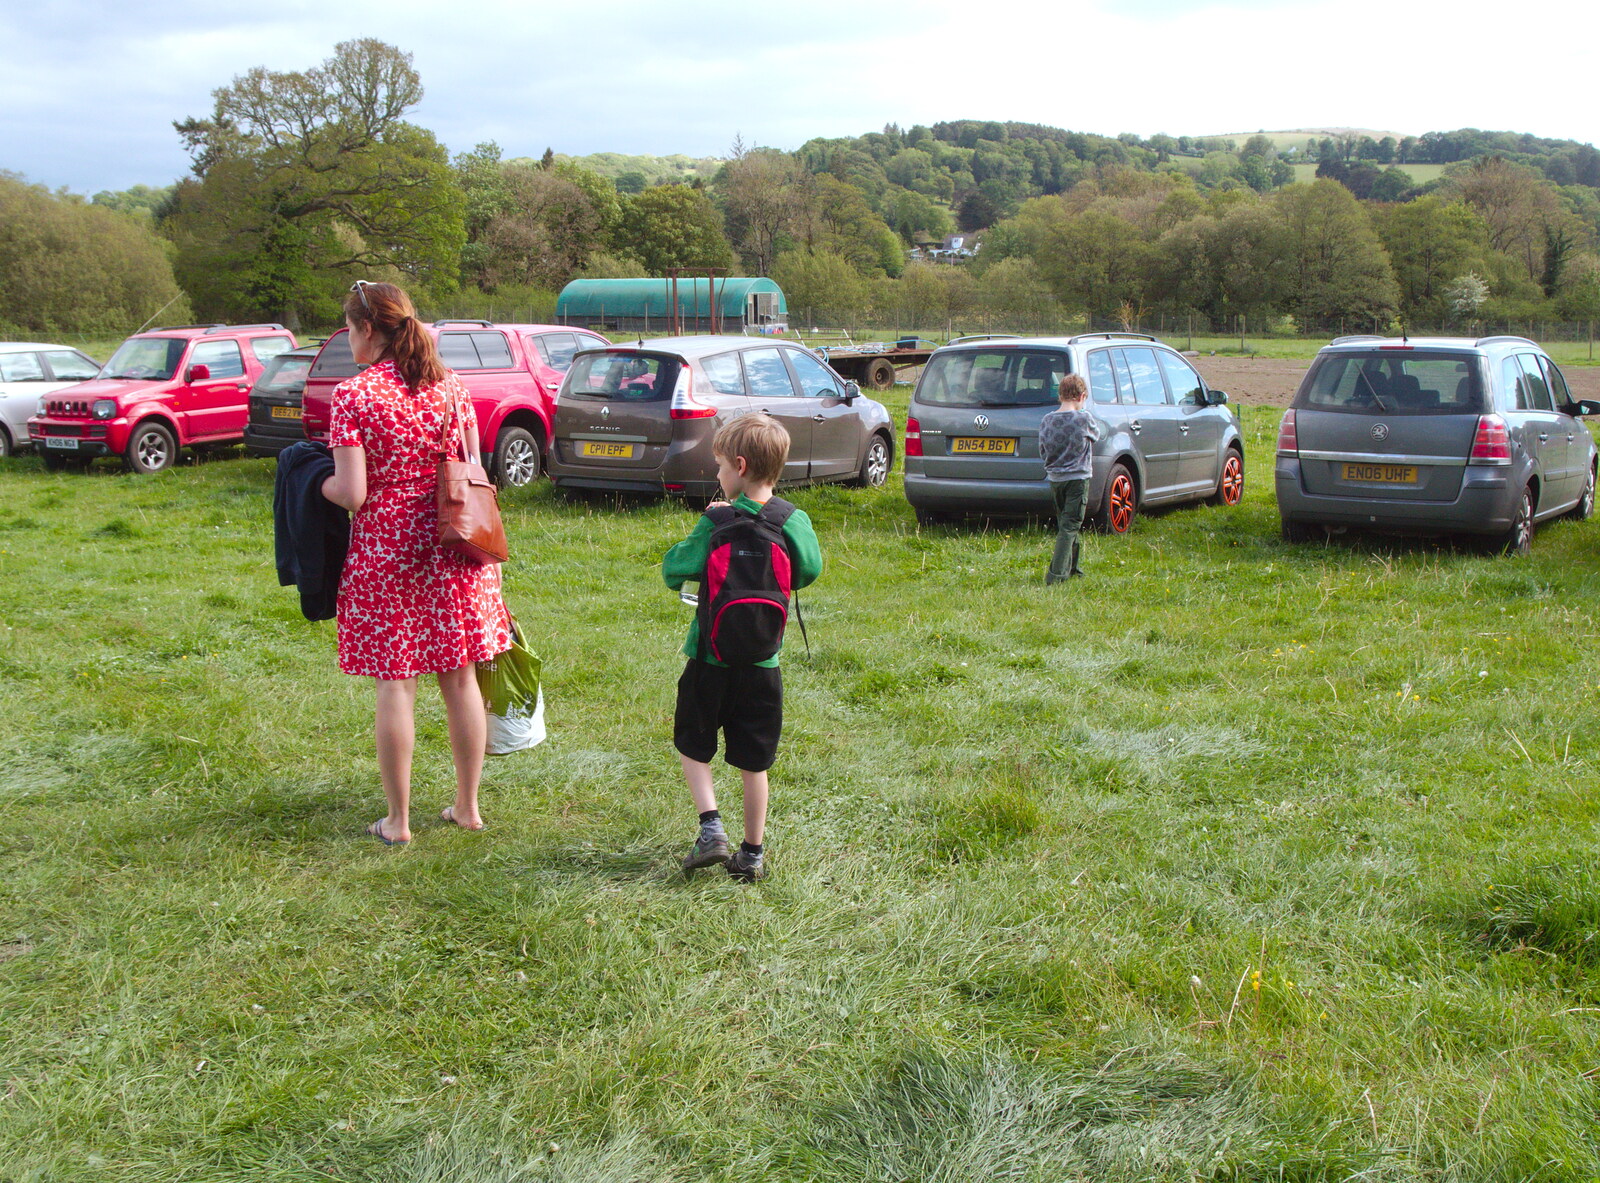 Chagford Lido and a Trip to Parke, Bovey Tracey, Devon - 25th May 2019: Isobel, Harry and Fred in the grassy car park